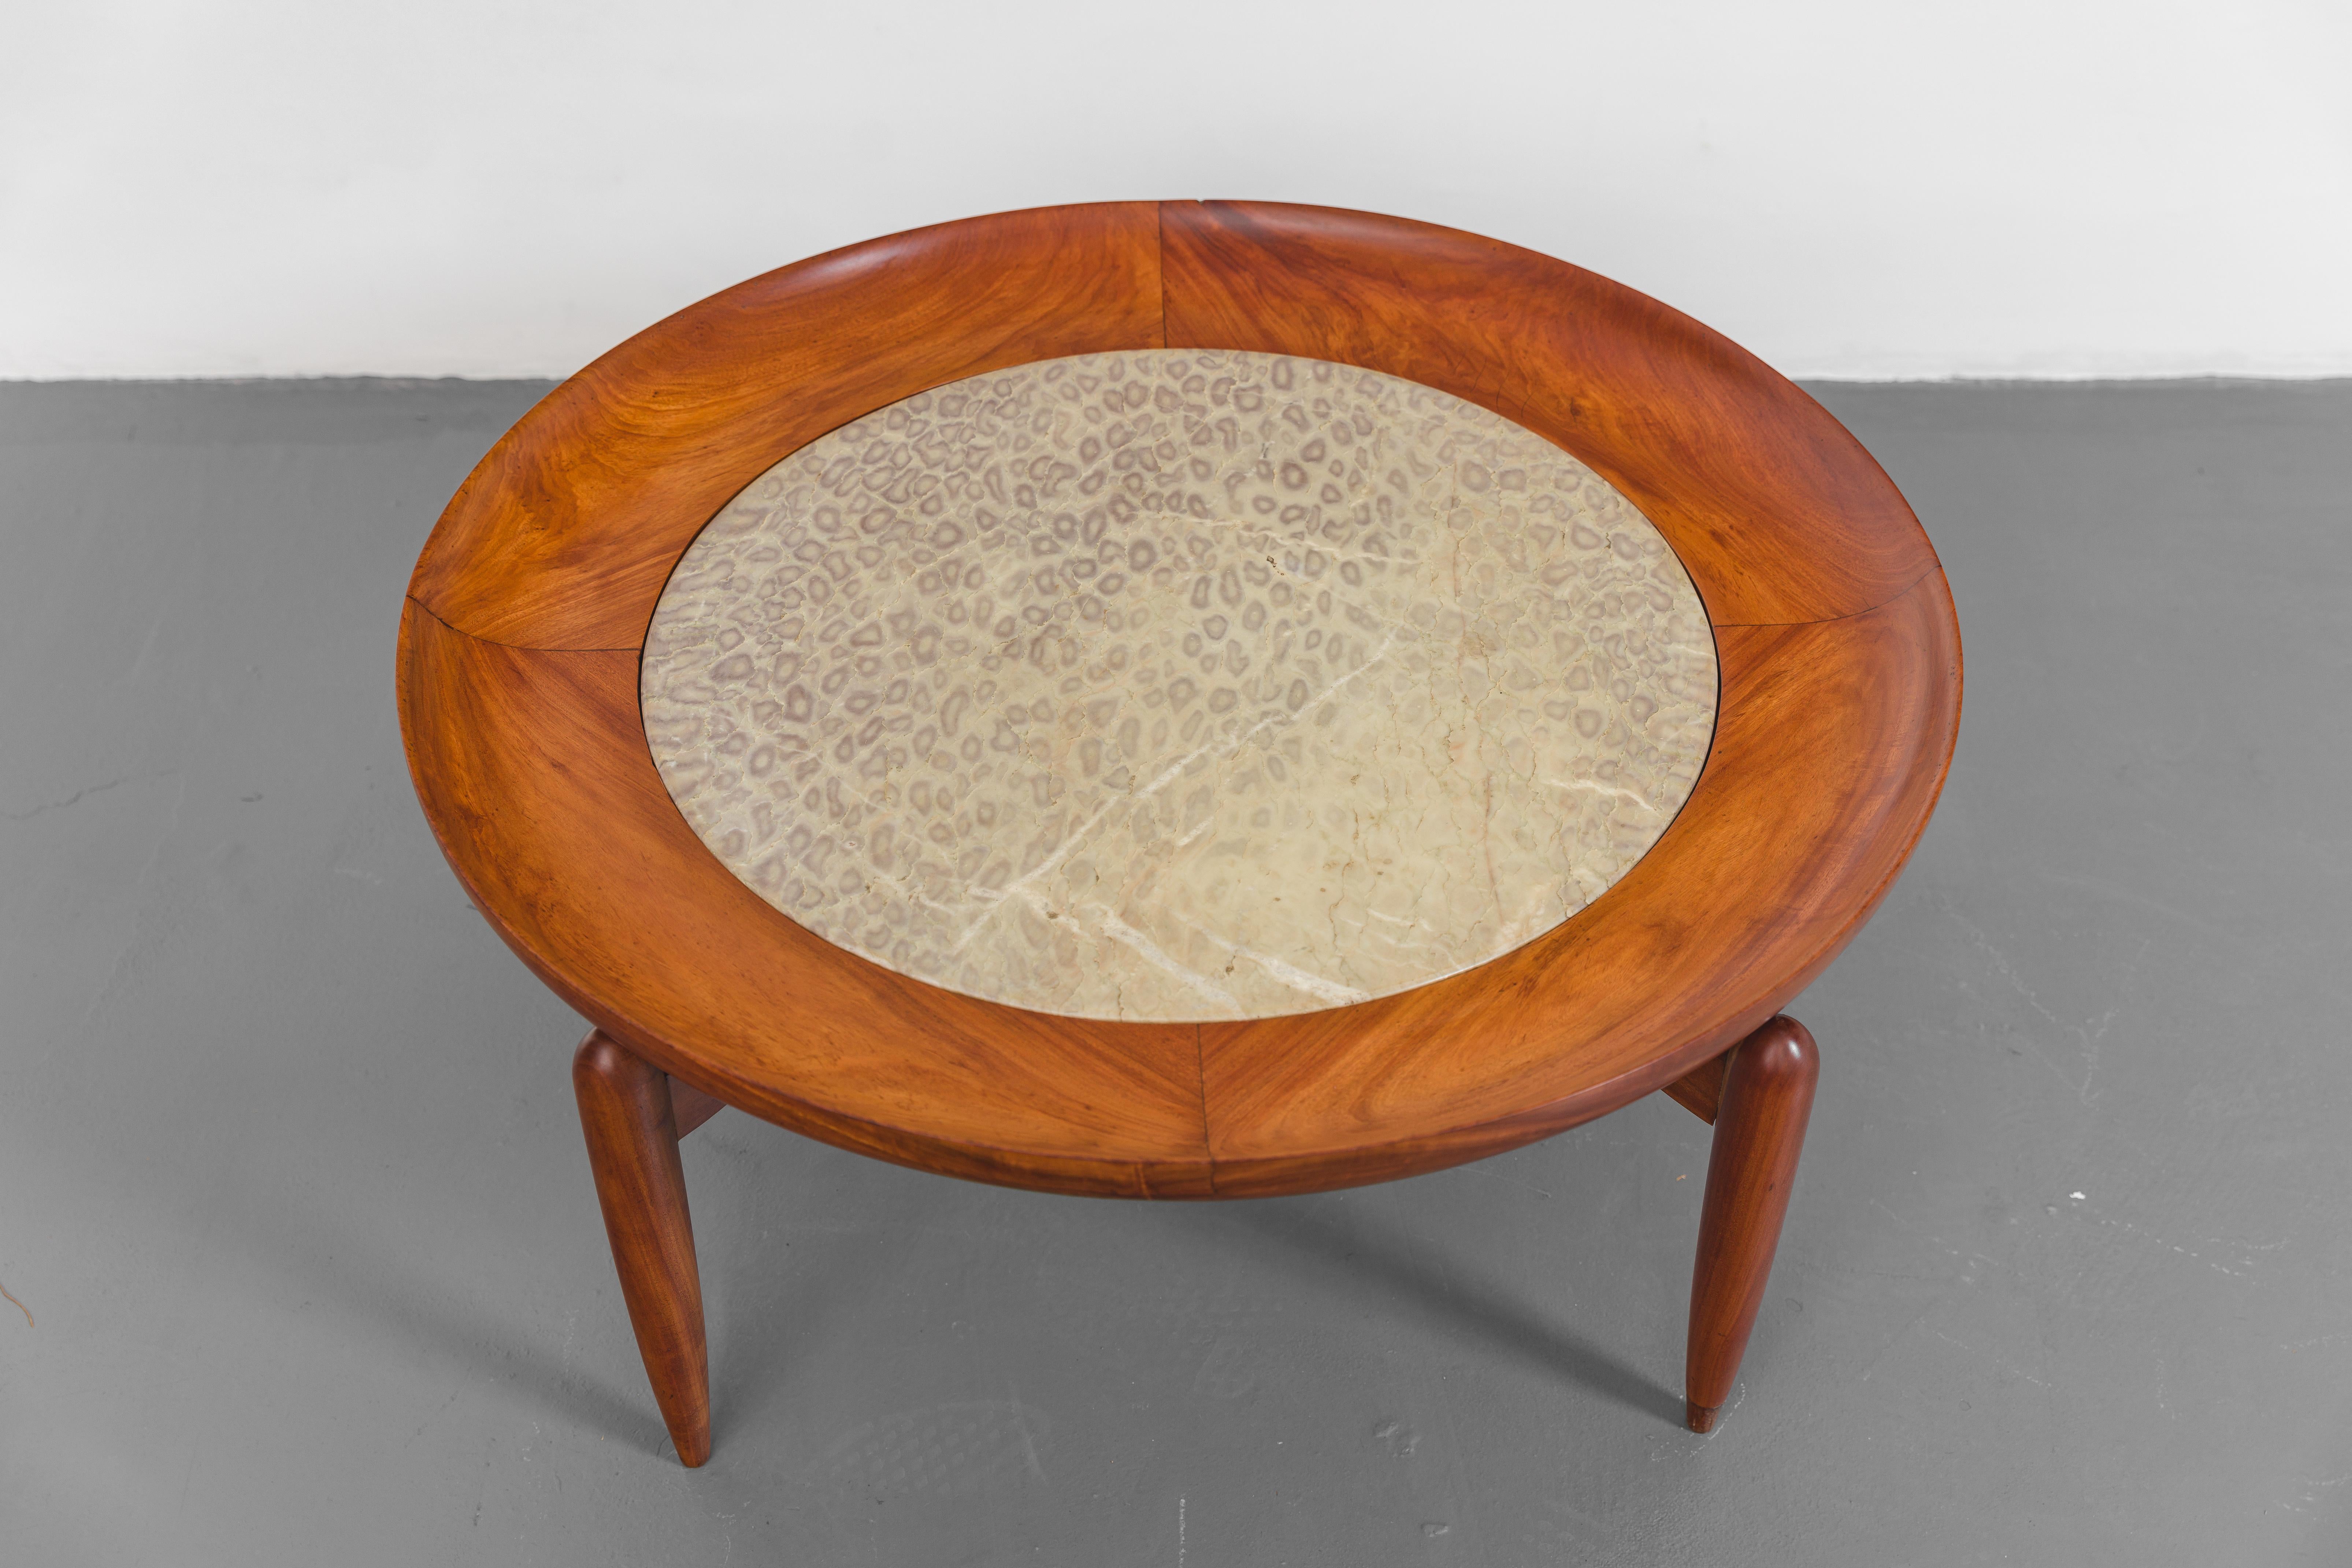 20th Century Coffee Table by Giuseppe Scapinelli, Brazilian Mid-Century Modern Design